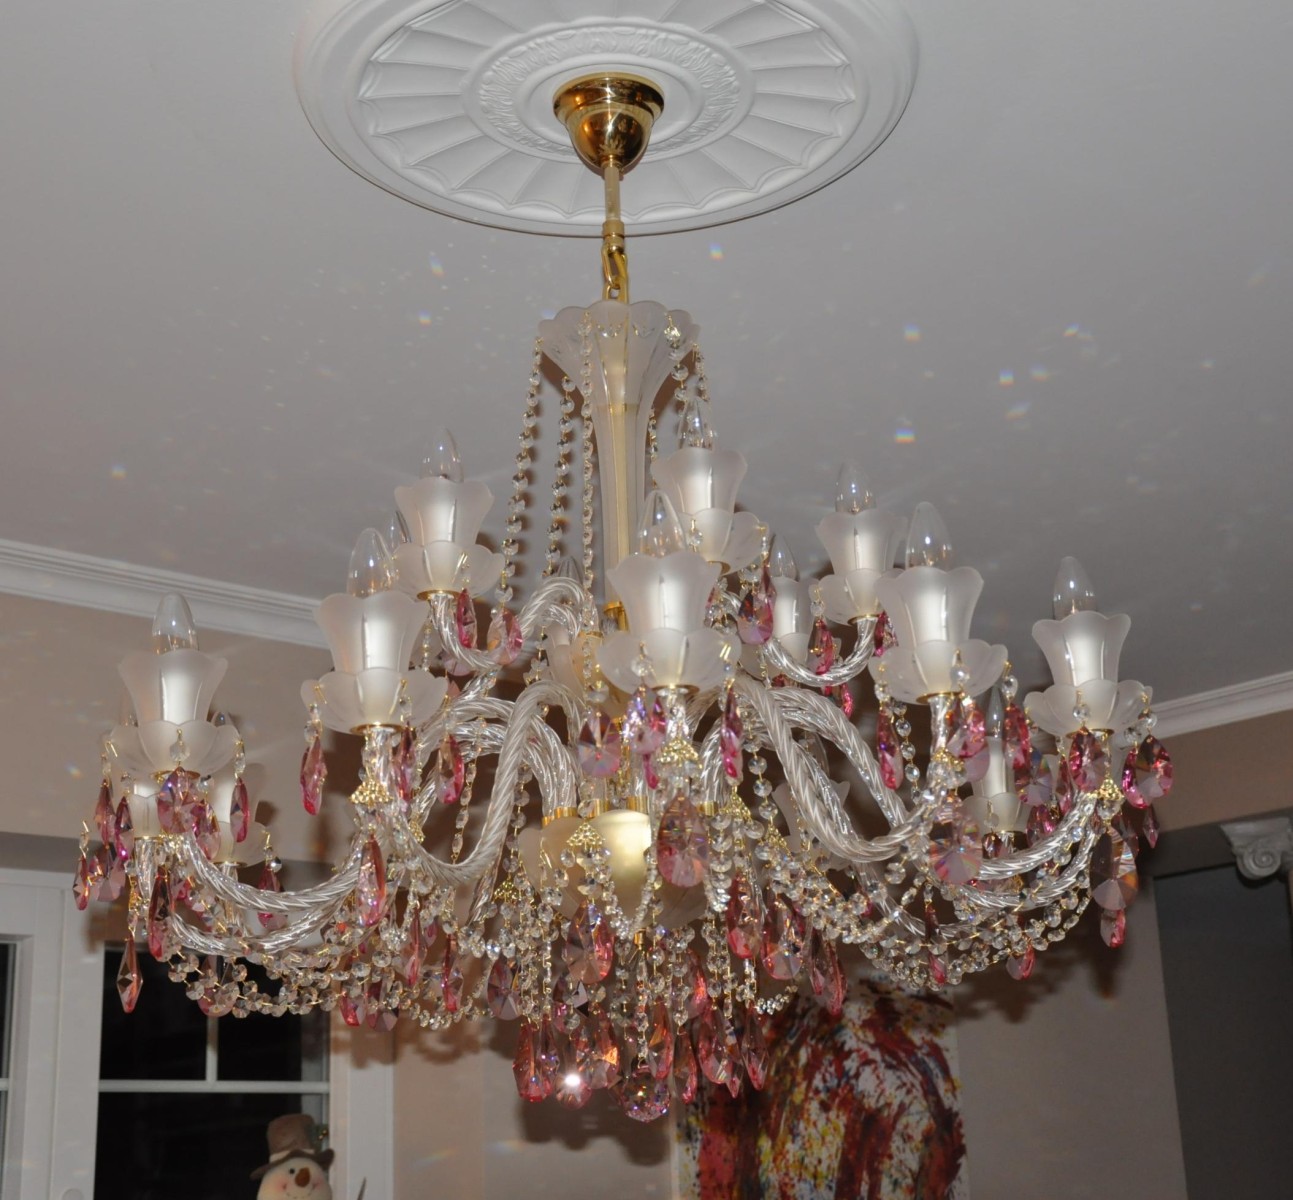 18 Arms violet crystal chandelier made of sand blasted glass & Cut Fuchsia  almonds